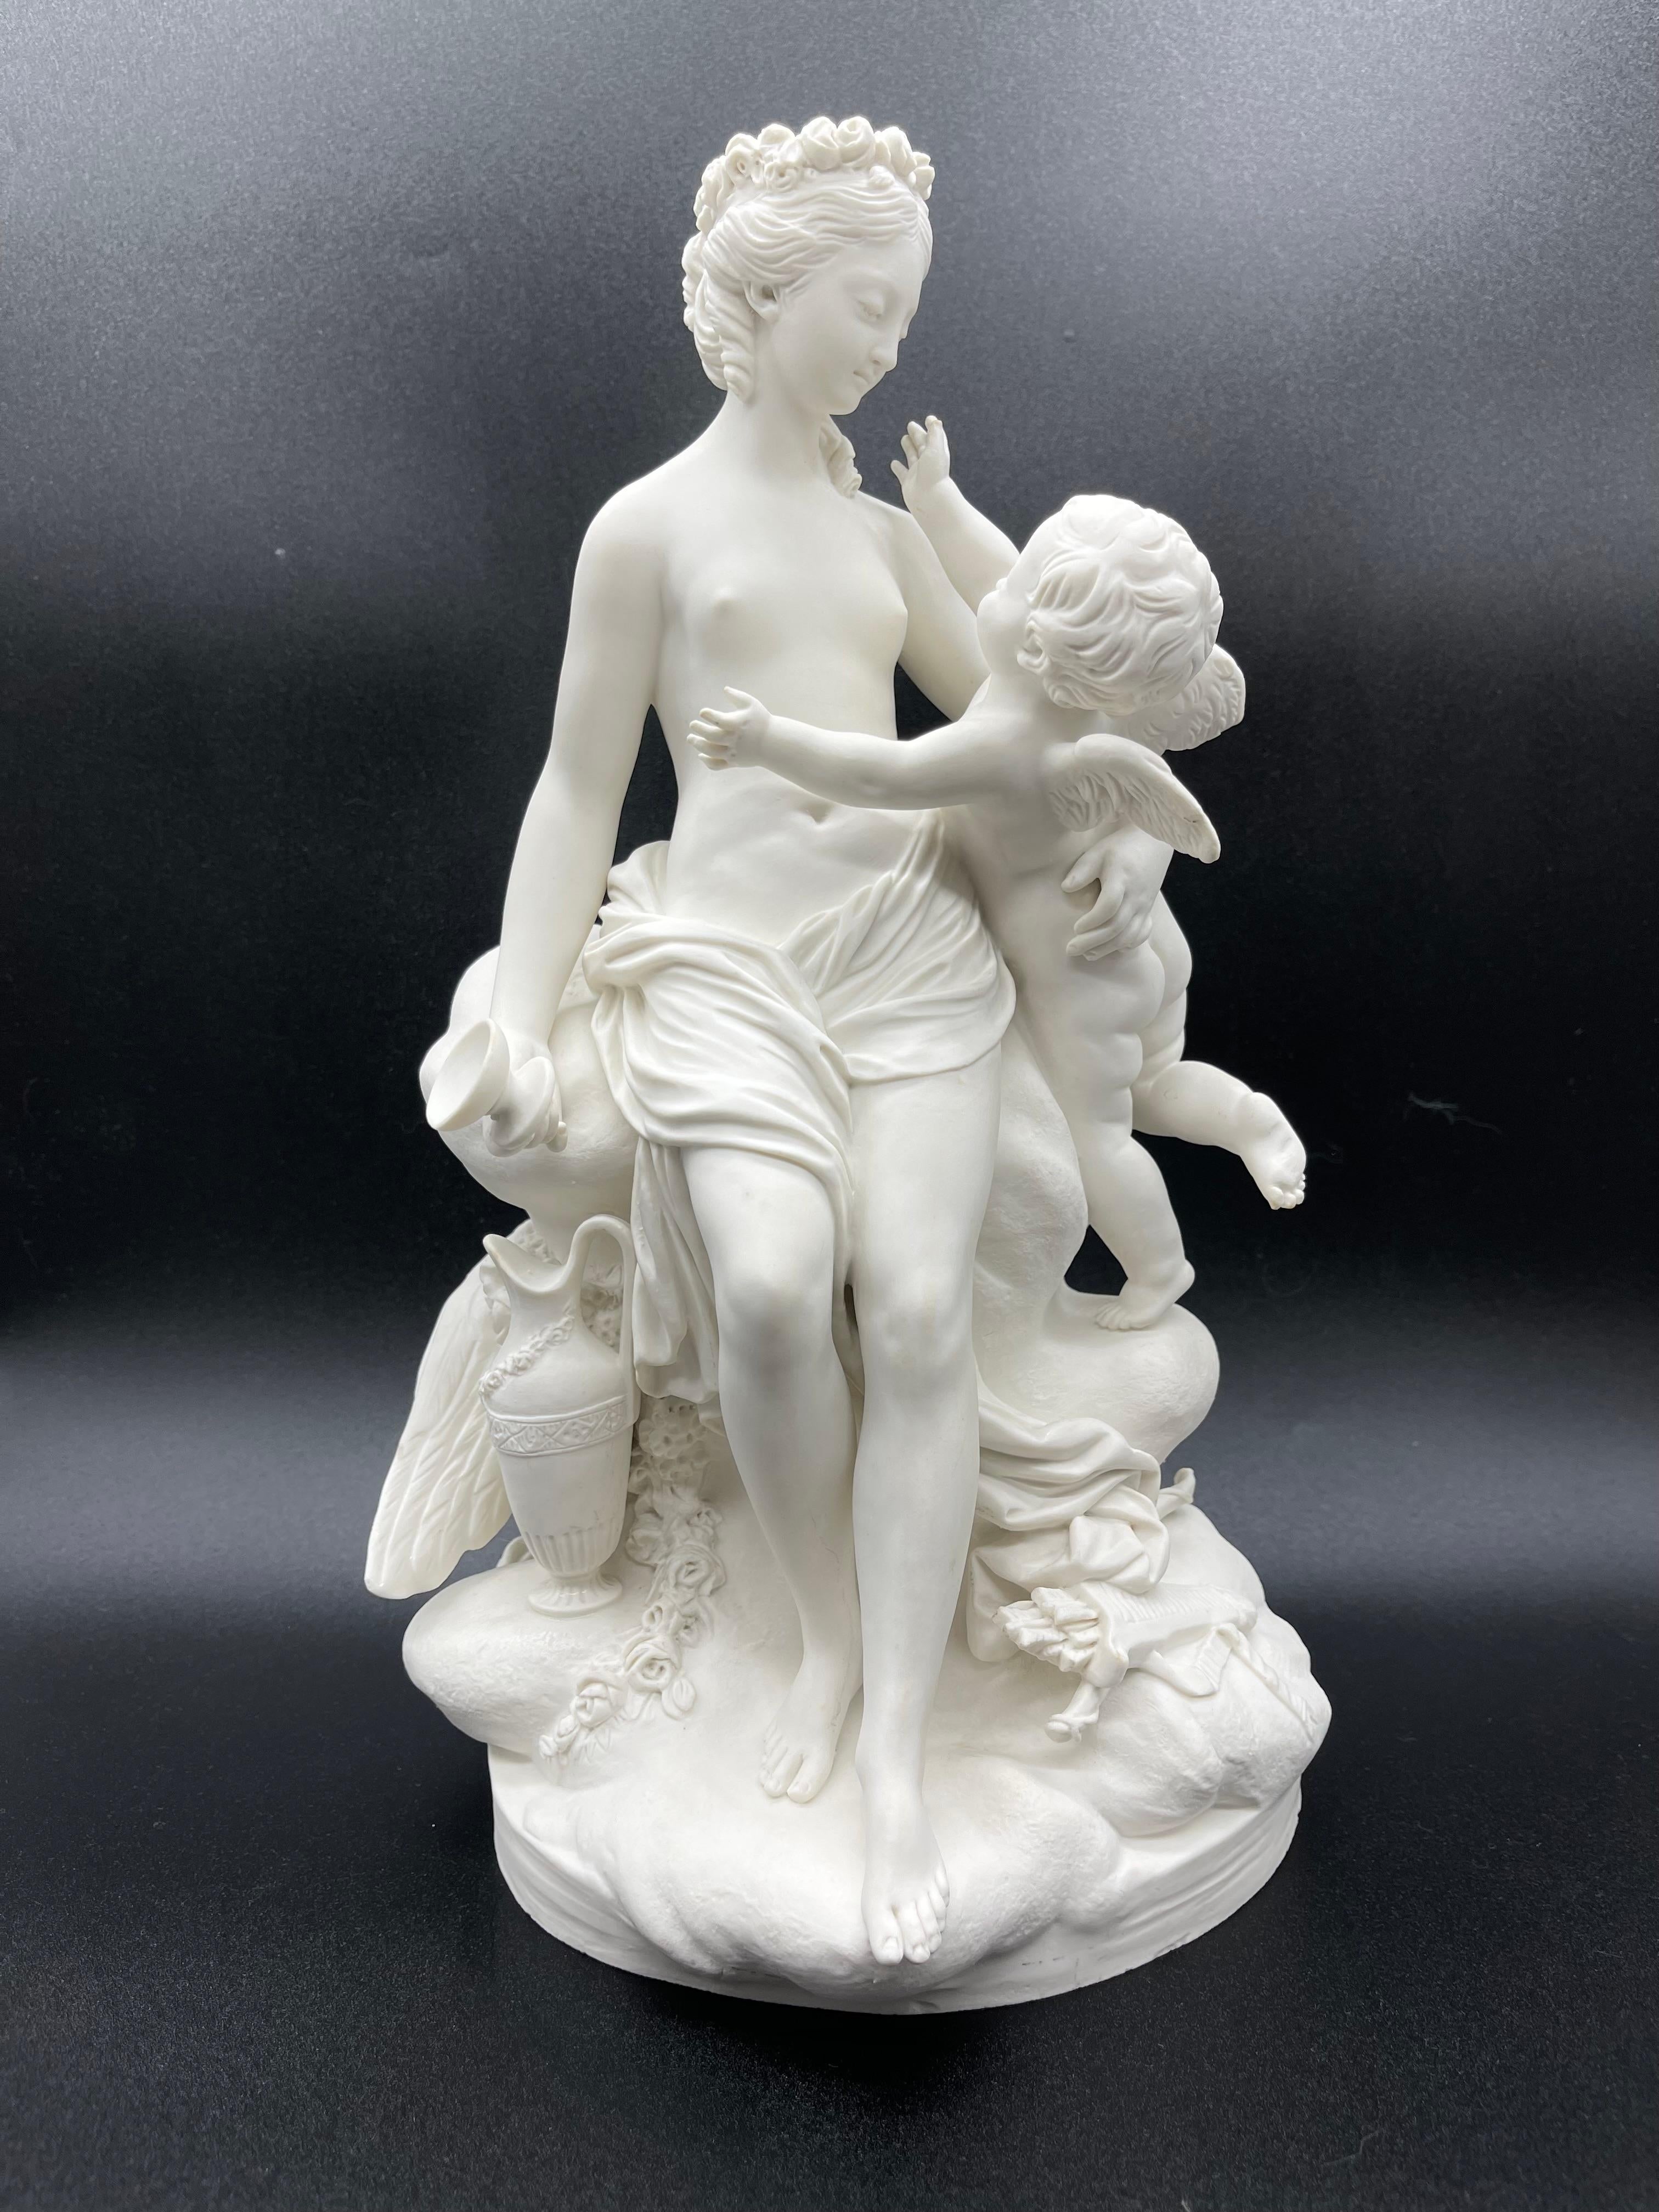 Discover the timeless elegance and symbolism of the Sèvres biscuit group featuring Psyche and Eros. This delicate work of art captures a mythical moment of love, sacrifice, and divine intervention.

The biscuit group portrays the beautiful Psyche